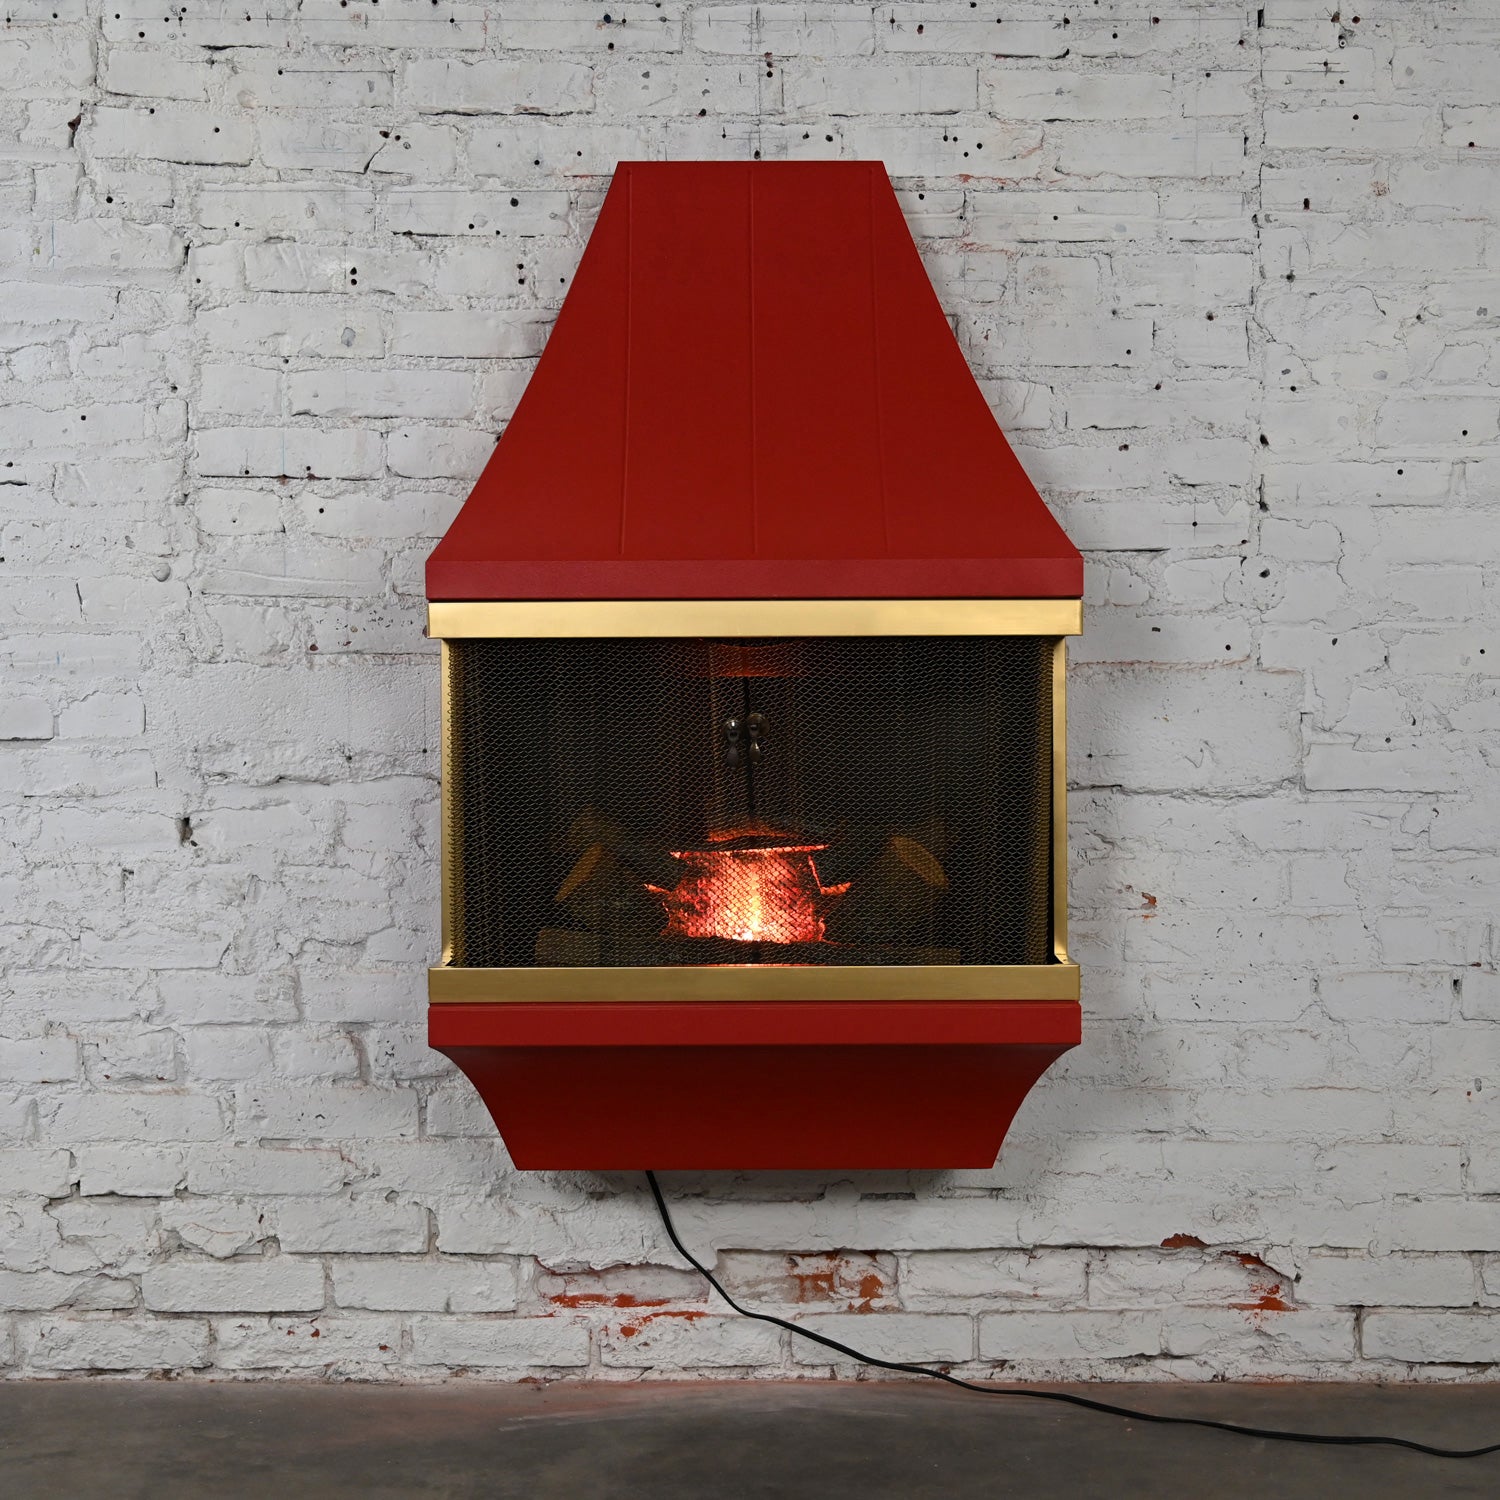 Incredible vintage Mid-Century Modern electric wall fireplace square orange frame with gold tone trim, artificial logs, and solid brass screens attributed to Montgomery Ward Style House Fireplace. This piece has been attributed based upon archived